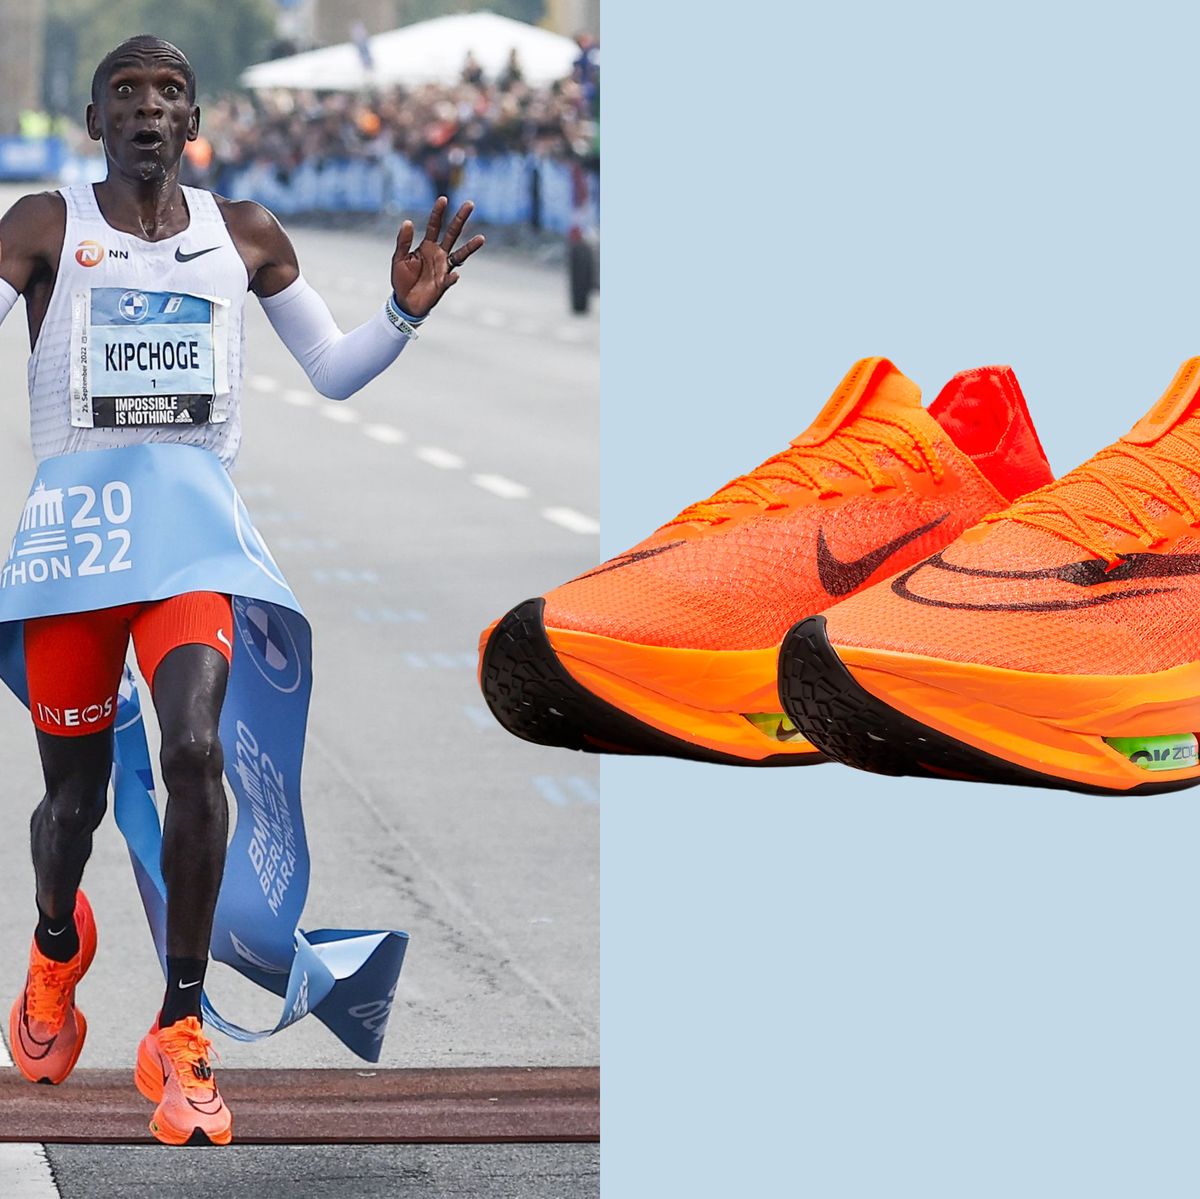 The Nike Zoom Alphafly Next% 2s Hold the Marathon World Record